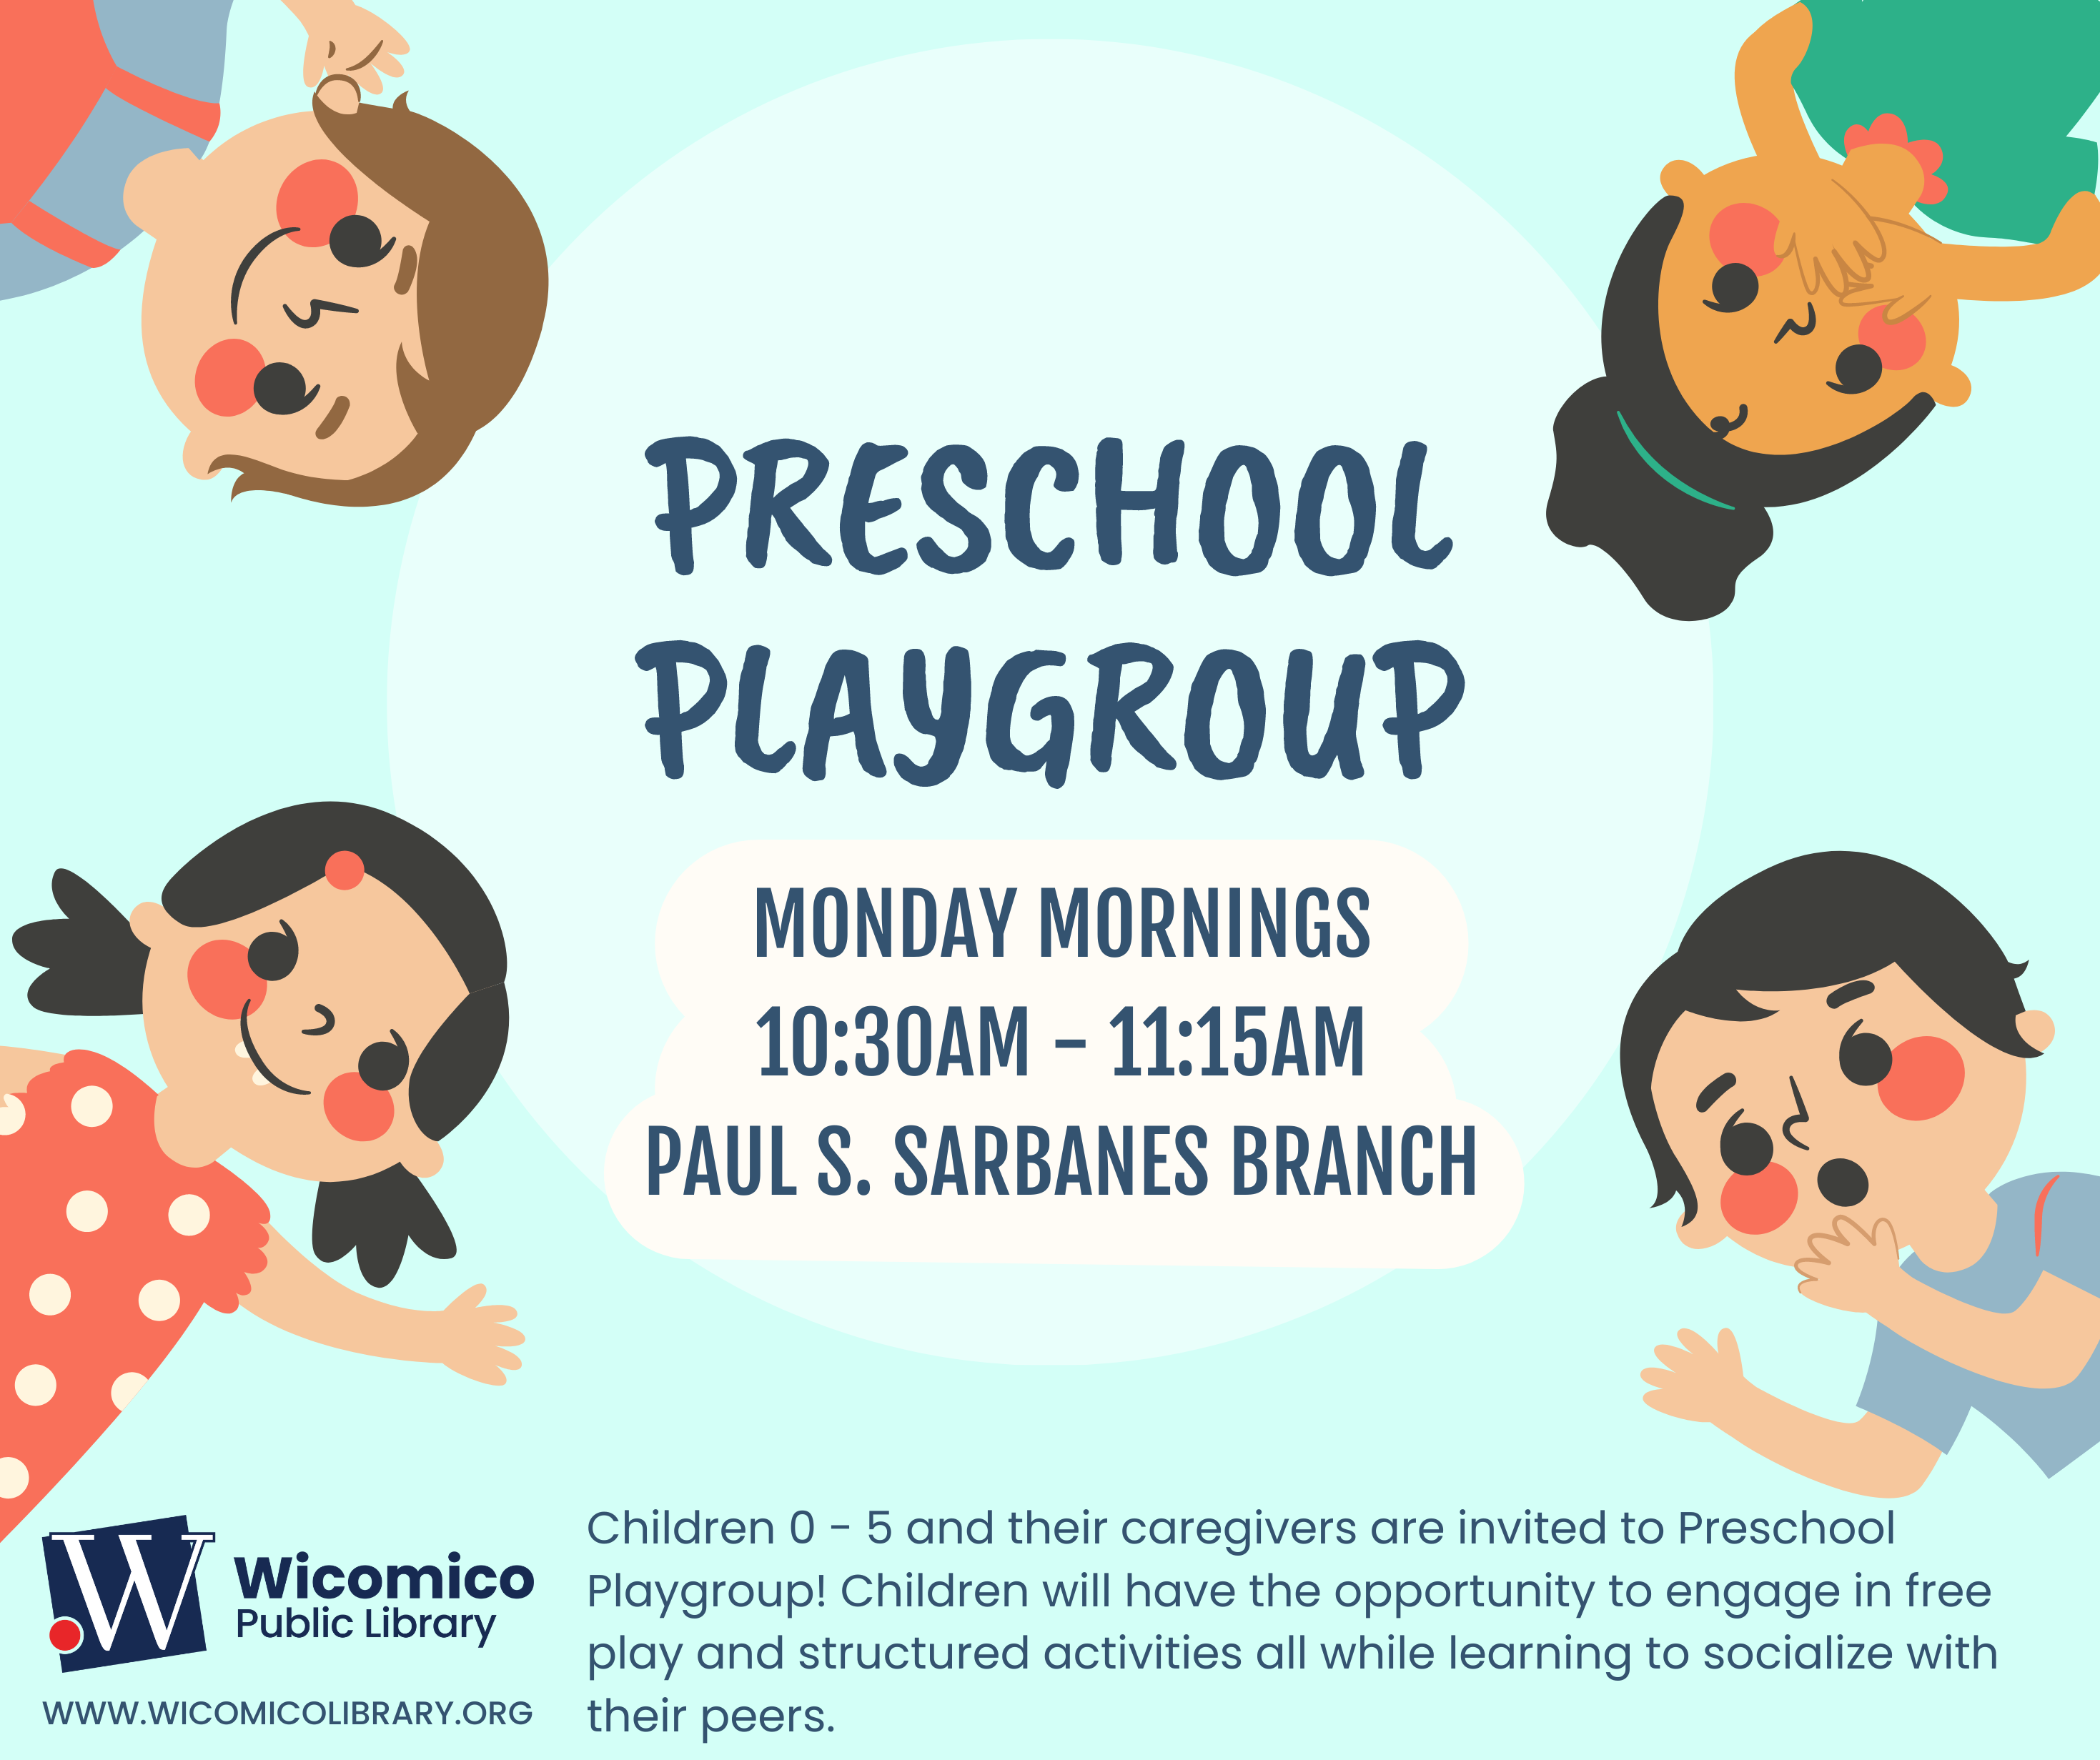 Children 0 - 5 and their caregivers are invited to Preschool Playgroup! Children will have the opportunity to engage in free play and structured activities all while learning to socialize with their peers. 